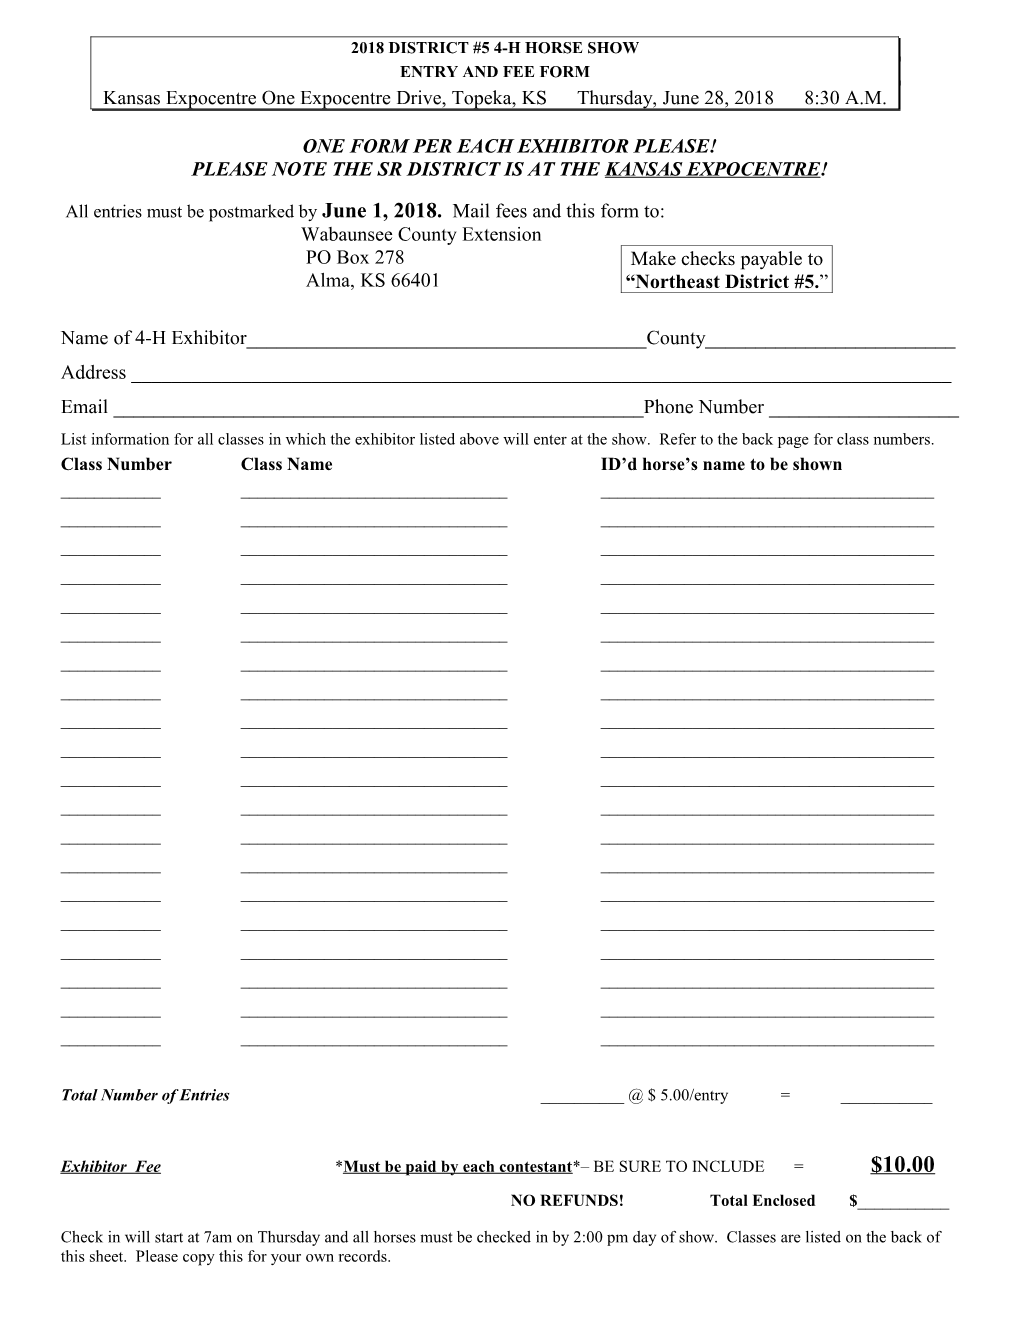 Entry and Fee Form